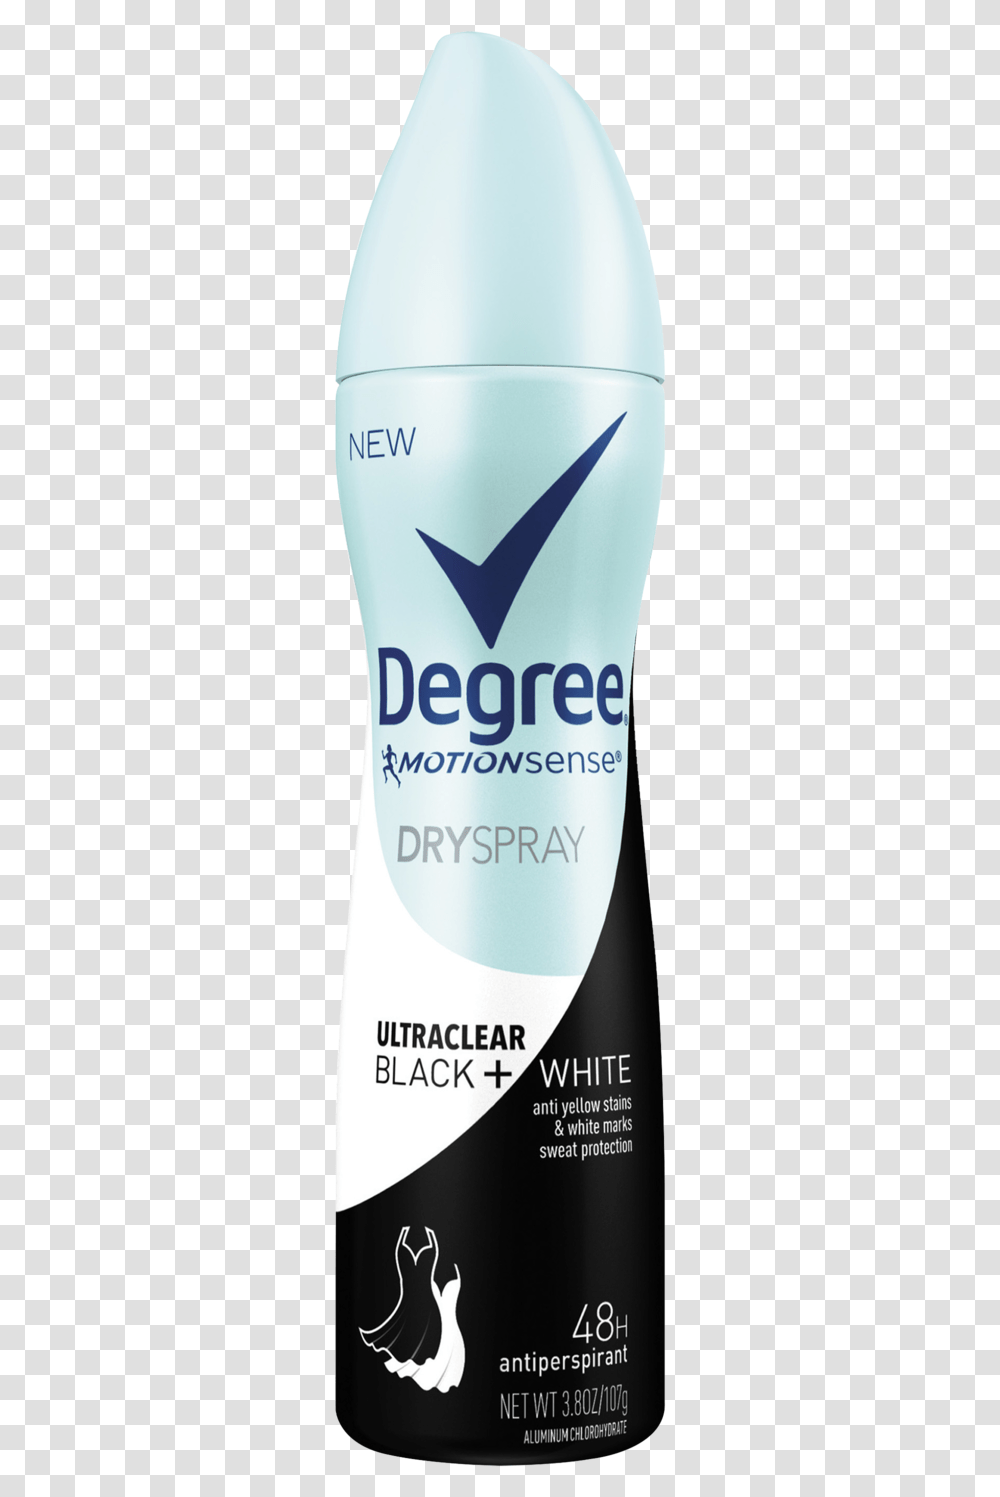 Deodorant Degree Spray Deodorant Black And White, Cosmetics, Bottle, Lotion, Sunscreen Transparent Png